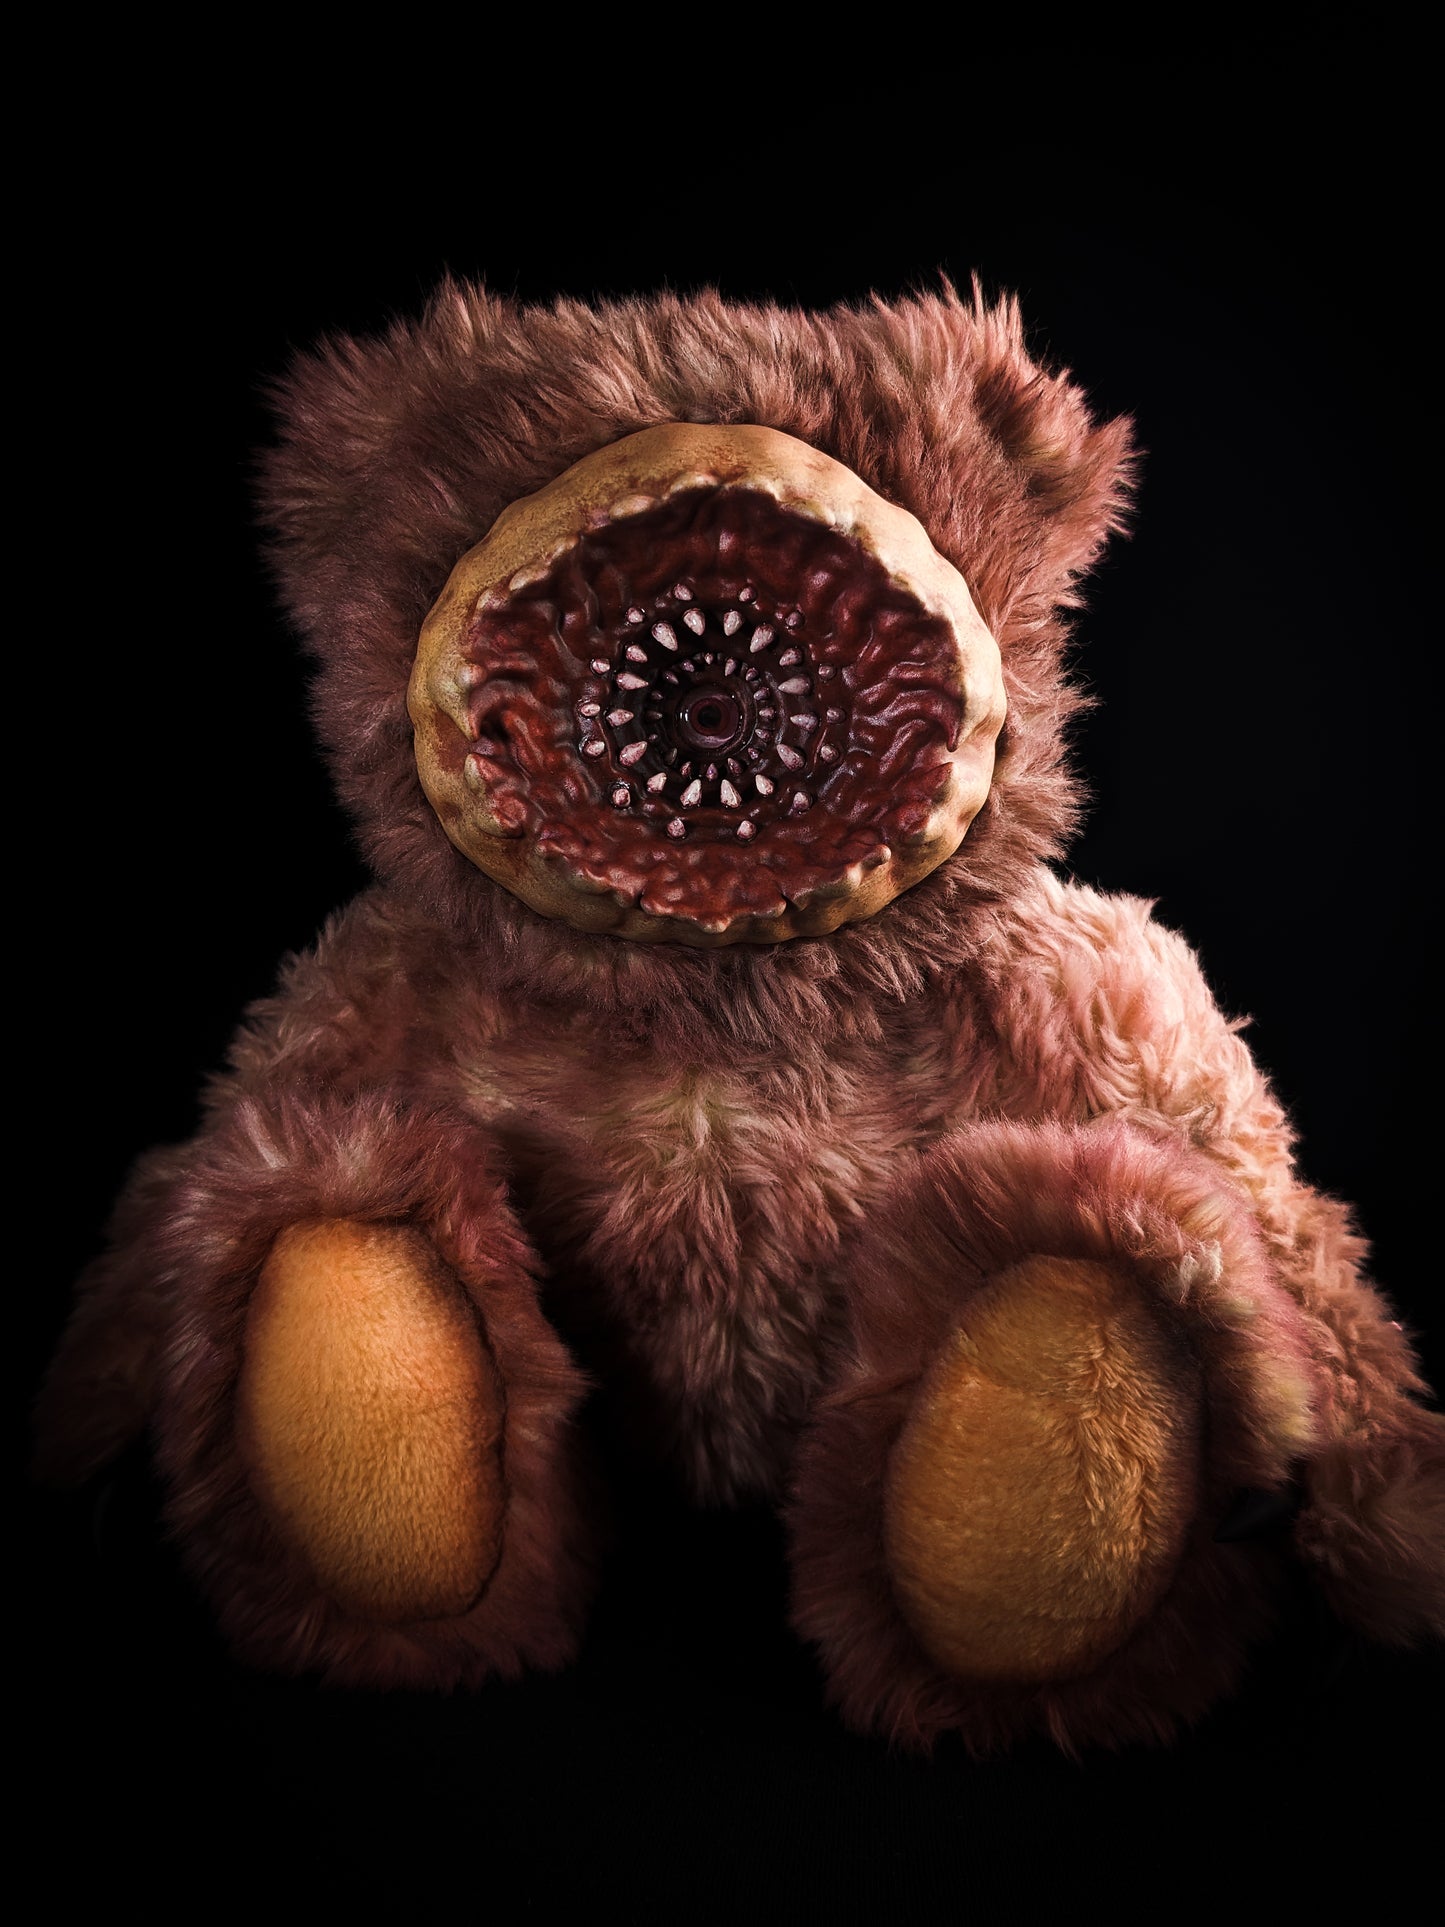 Monstrous Mutation: URCHIN - CRYPTCRITS Handcrafted Gory Mutant Monster Art Doll Plush Toy for Macabre Mavens